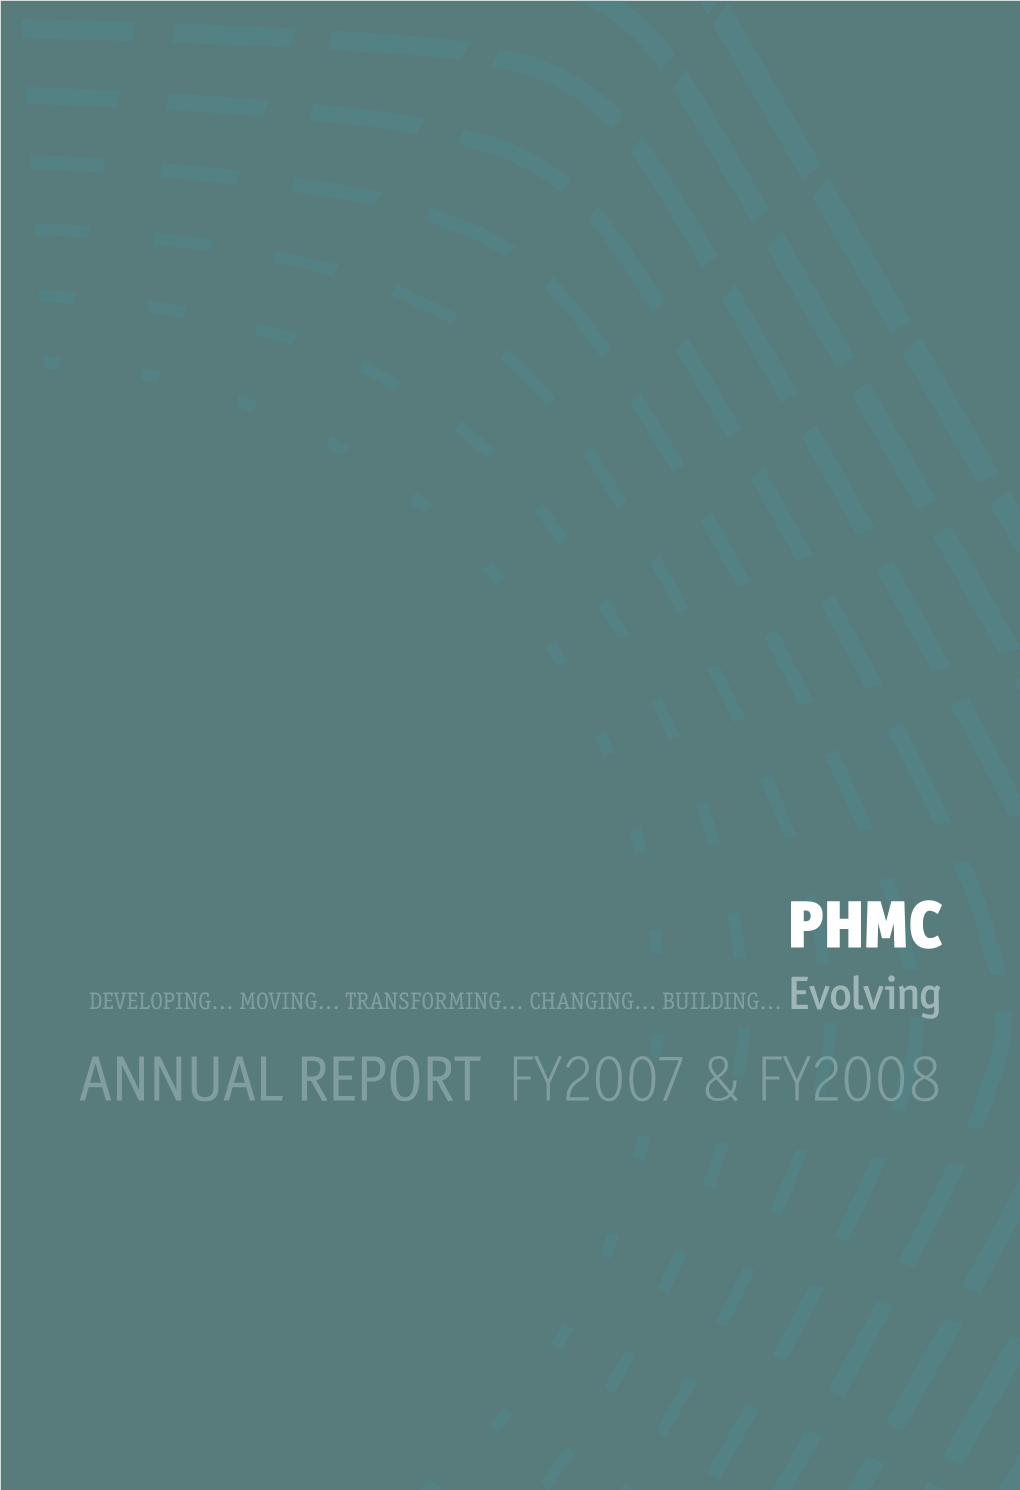 Annual Report FY2007 & FY2008